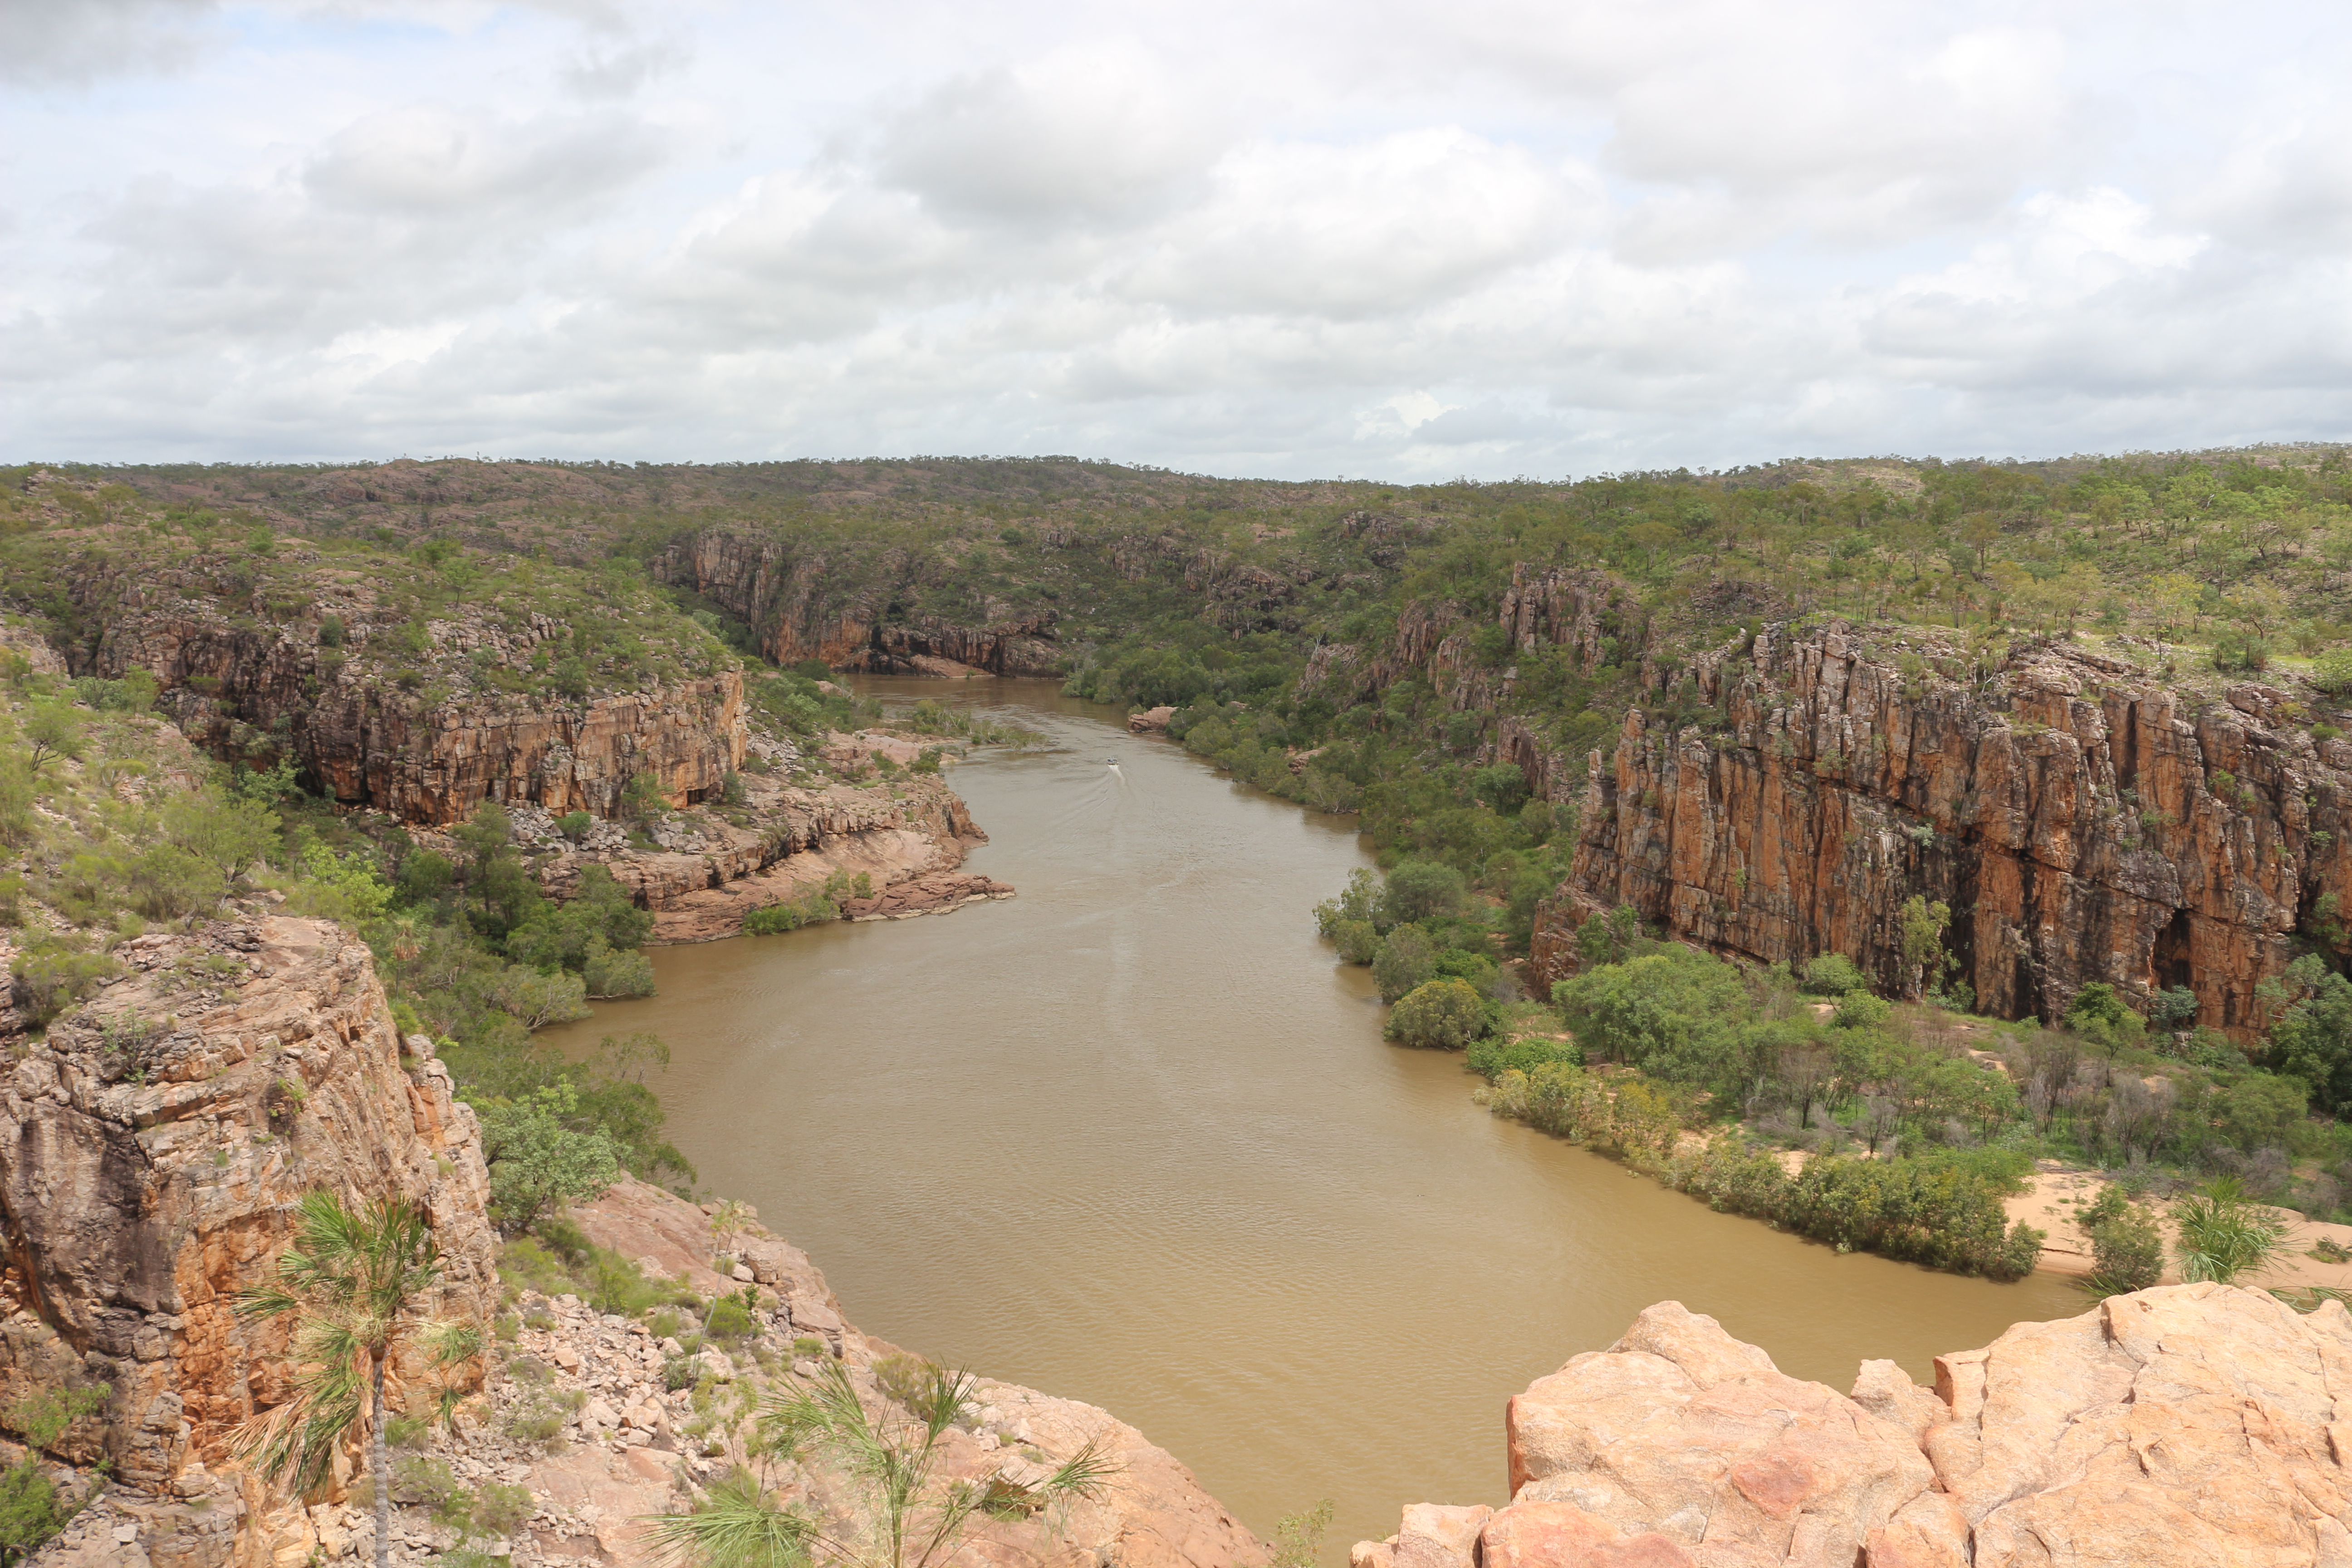 The Katherine River snakes through high cliffs.